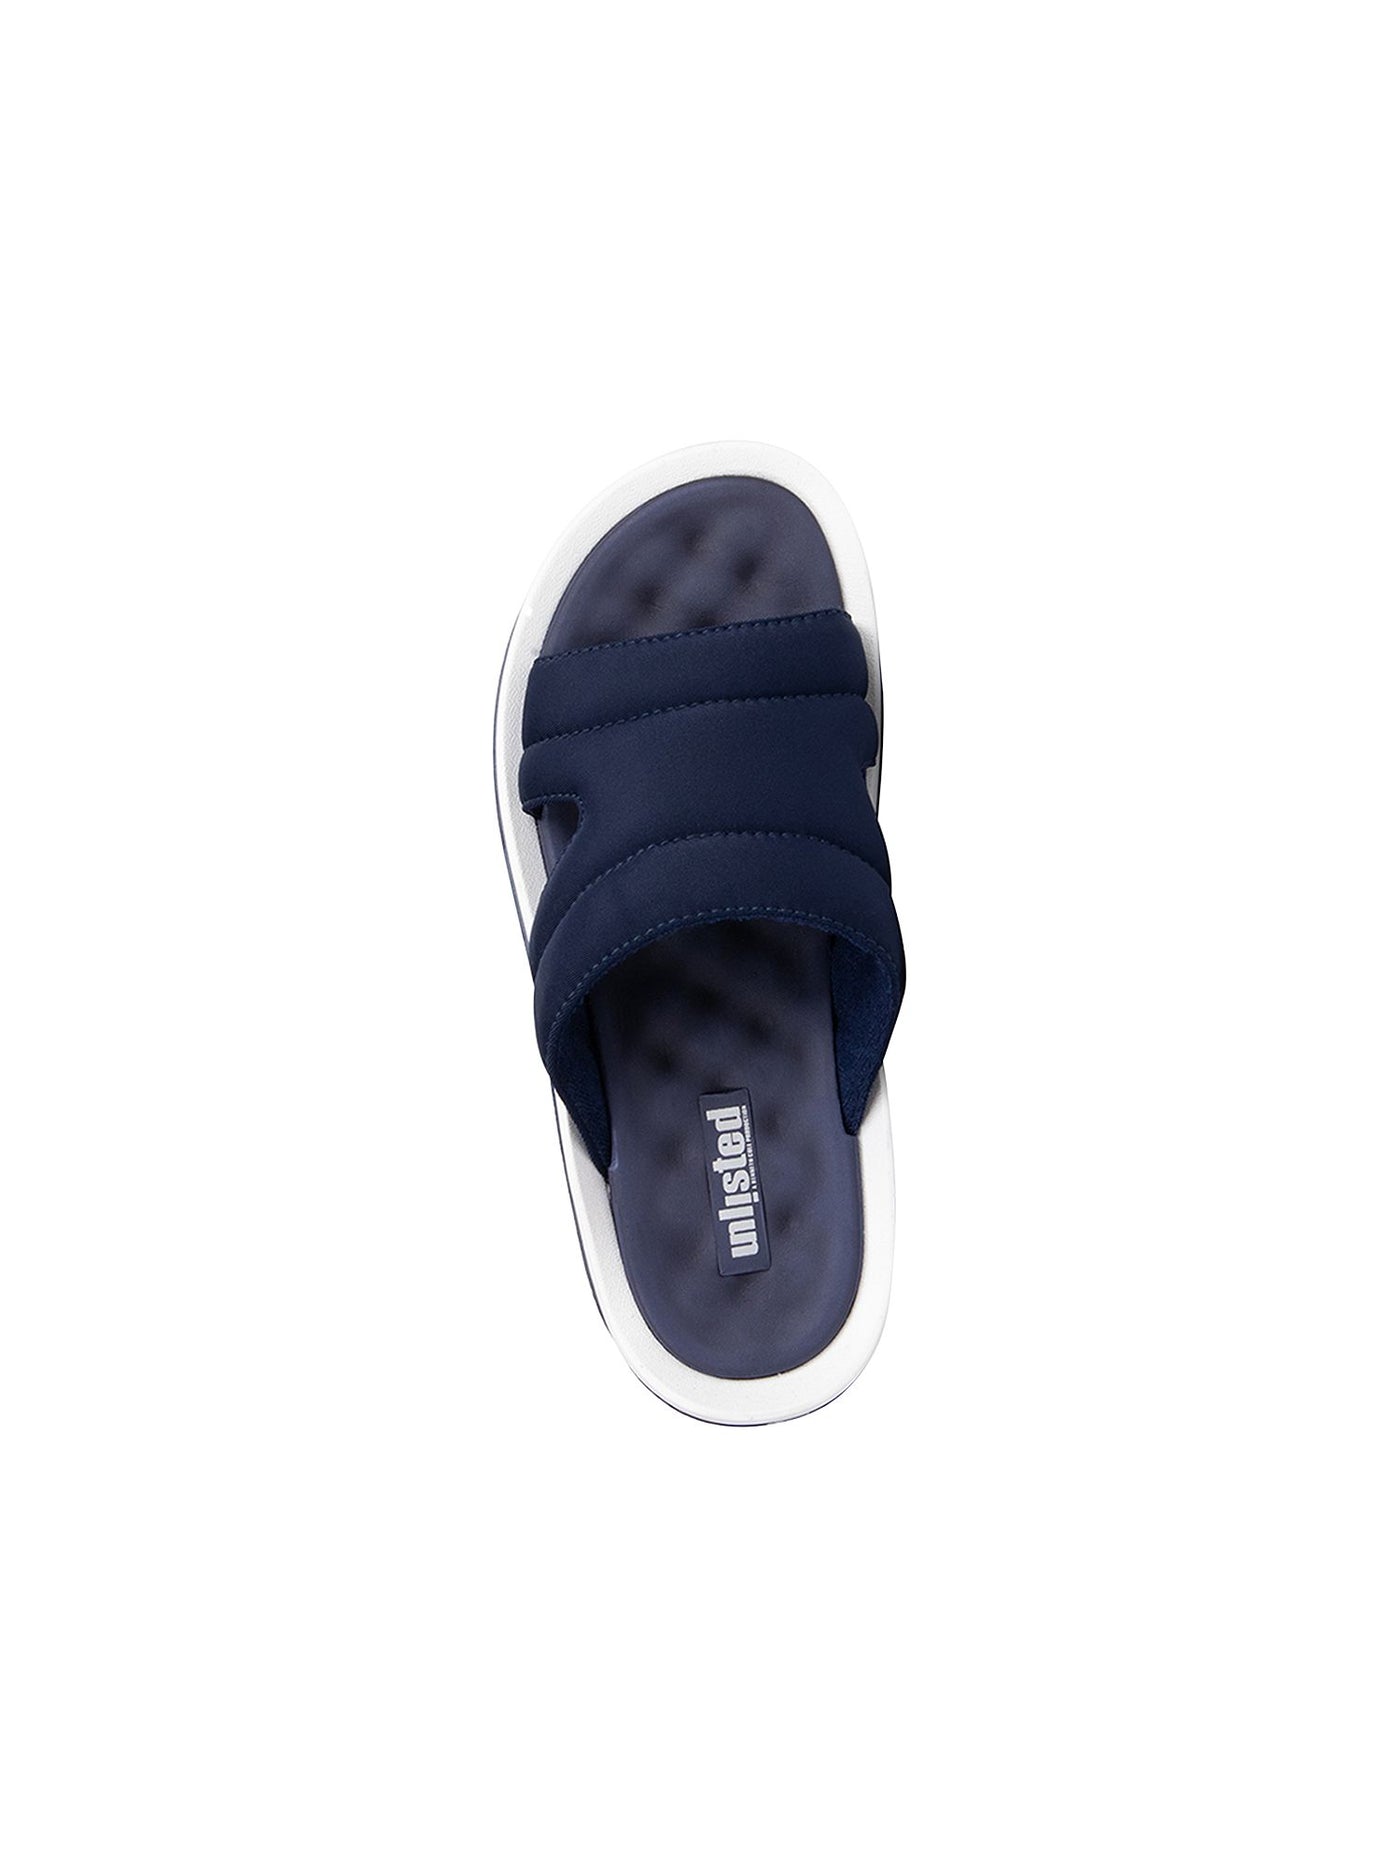 UNLISTED by KENNETH COLE Mens Navy Cut Out Quilted Quinn Round Toe Slip On Slide Sandals Shoes 9 M